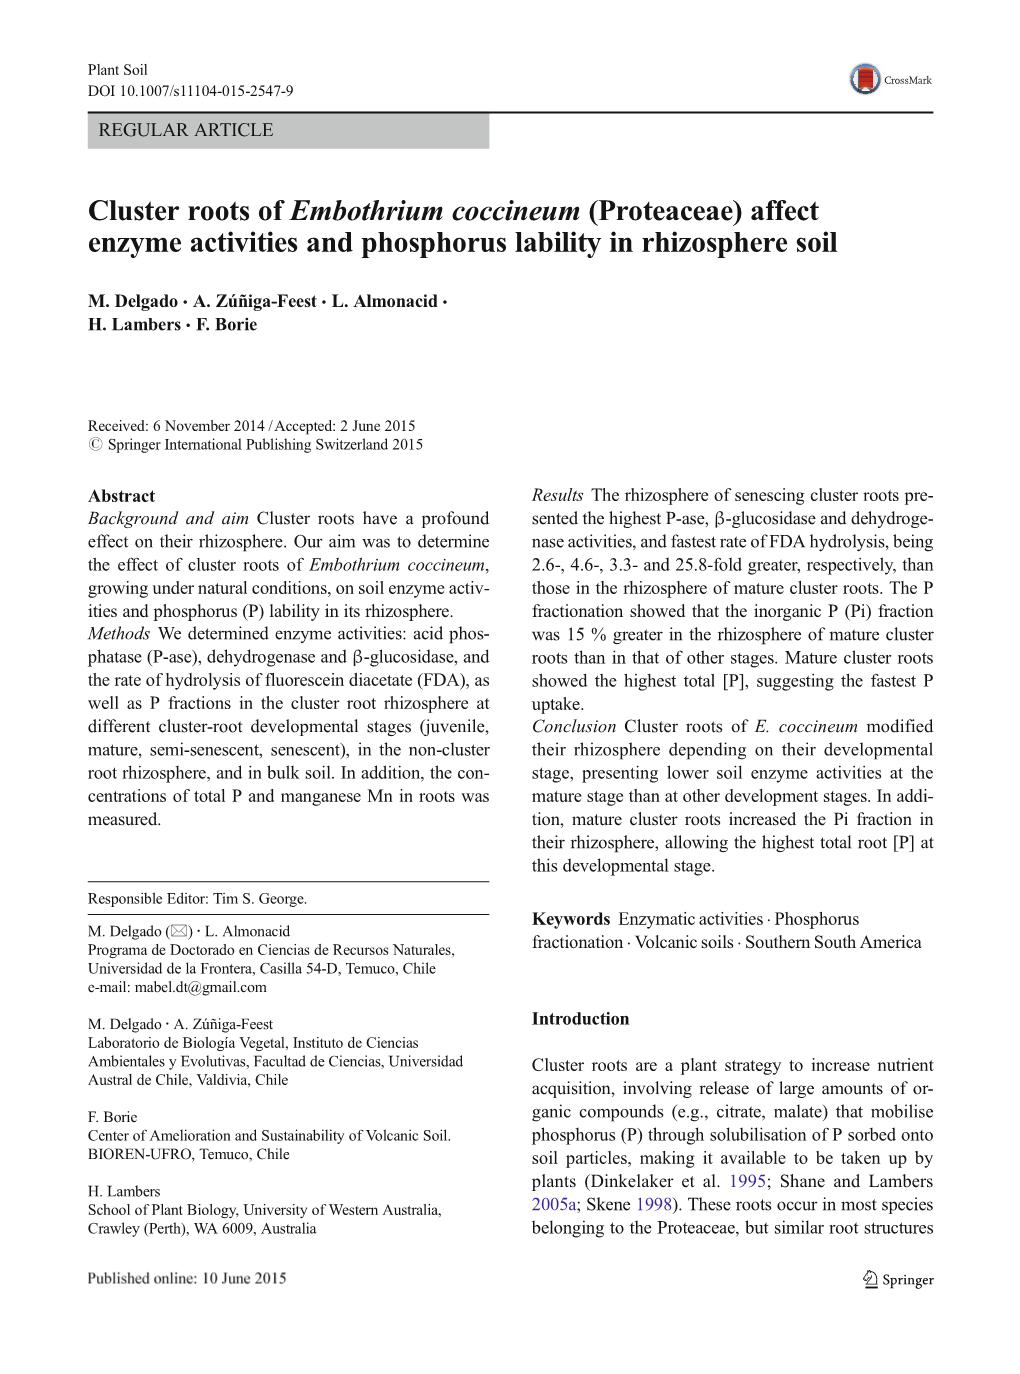 Cluster Roots of Embothrium Coccineum (Proteaceae) Affect Enzyme Activities and Phosphorus Lability in Rhizosphere Soil